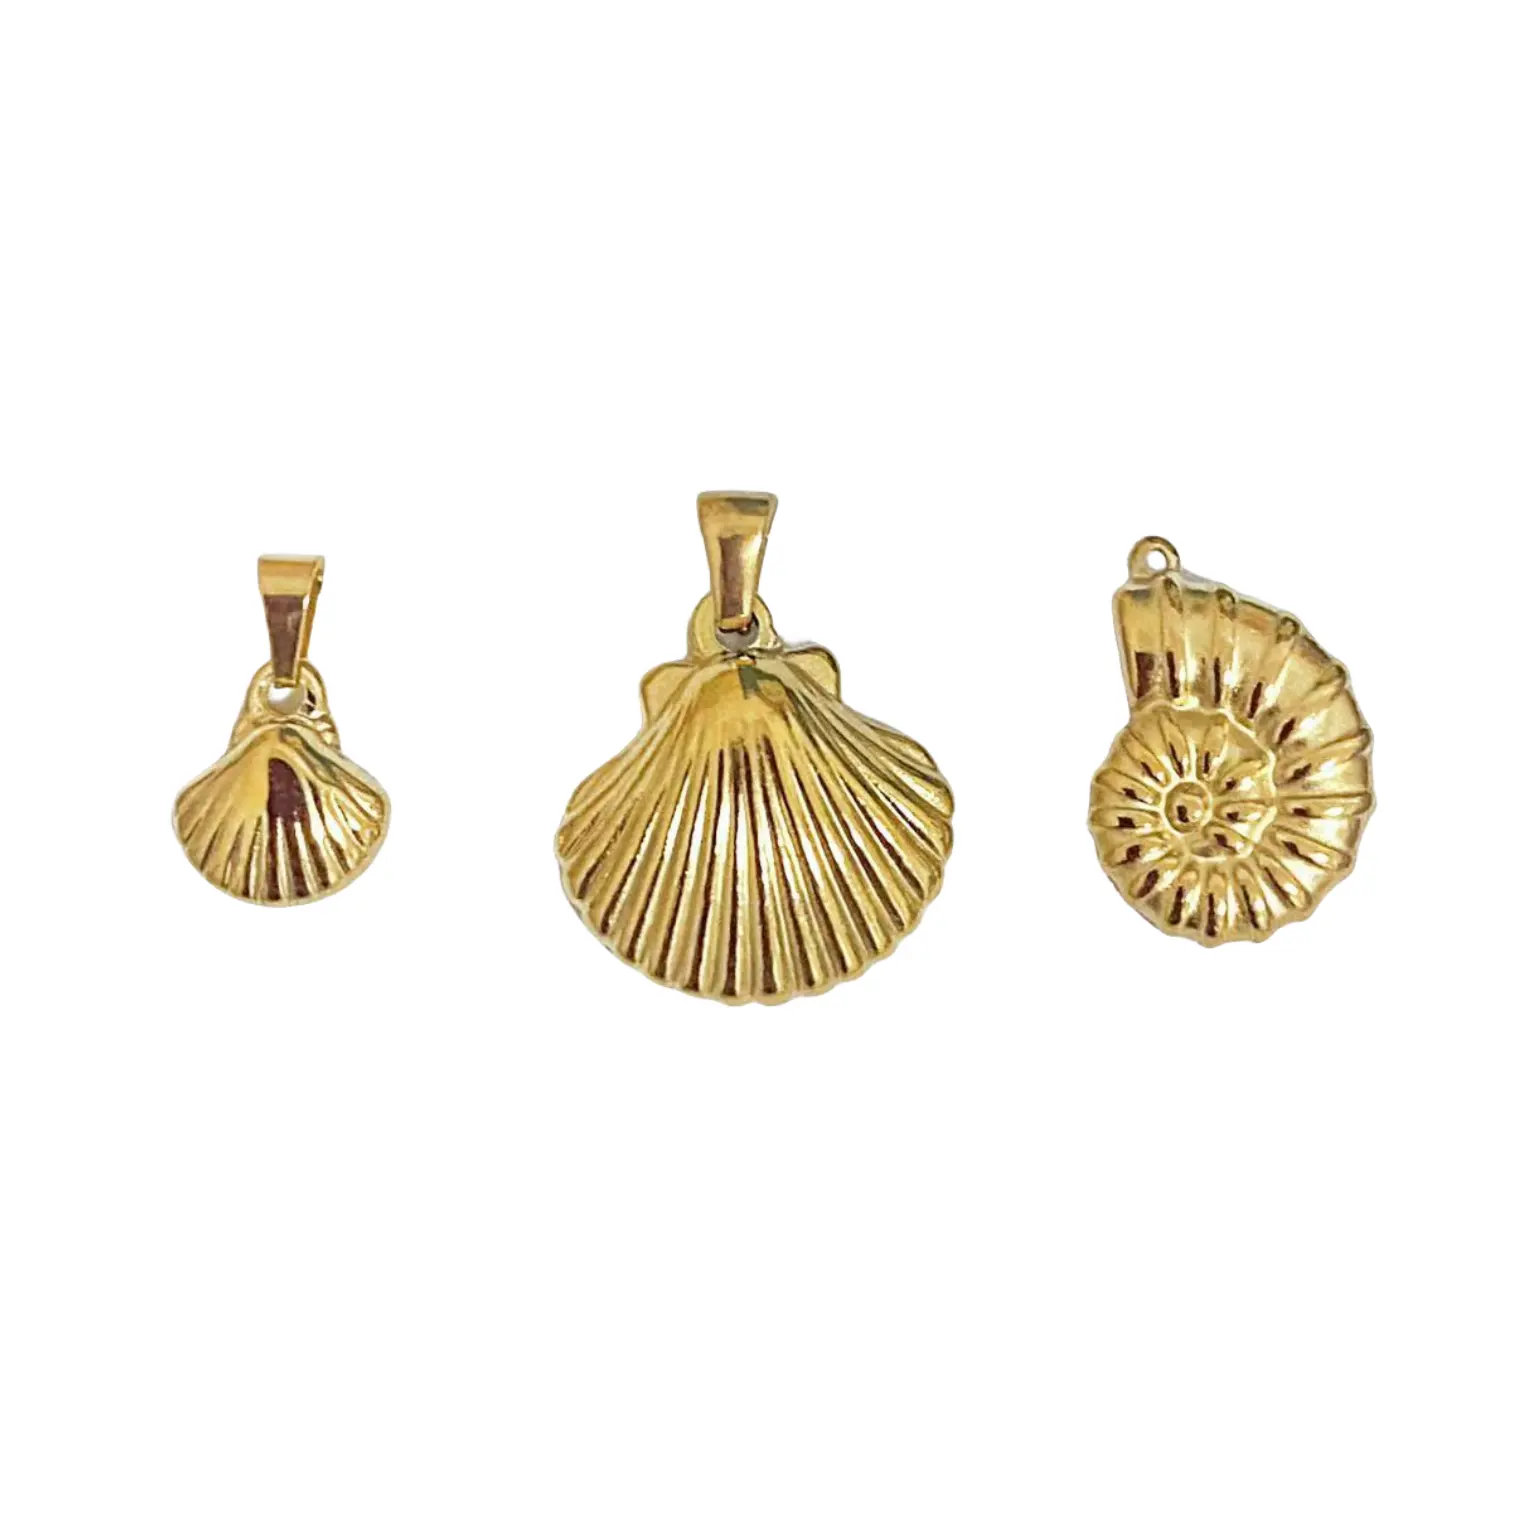 Wholesale Stainless Steel Shell Conch Scallops Pendant Necklace No Fade Gold Plated Charms for Jewelry Making DIY Accessories